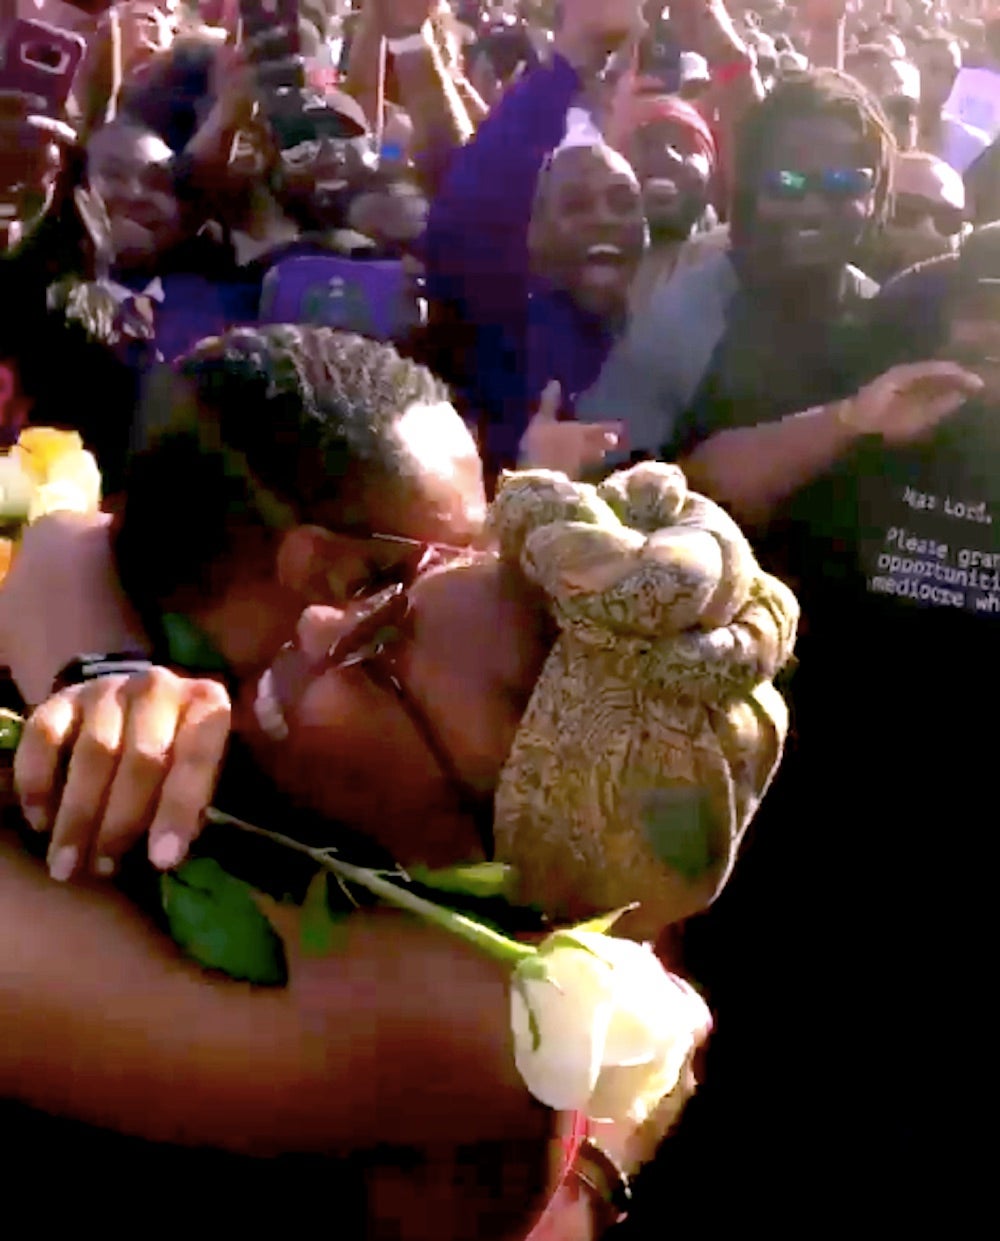 Two Couples Got Engaged Over Homecoming Weekend And It Was Peak #Black Love